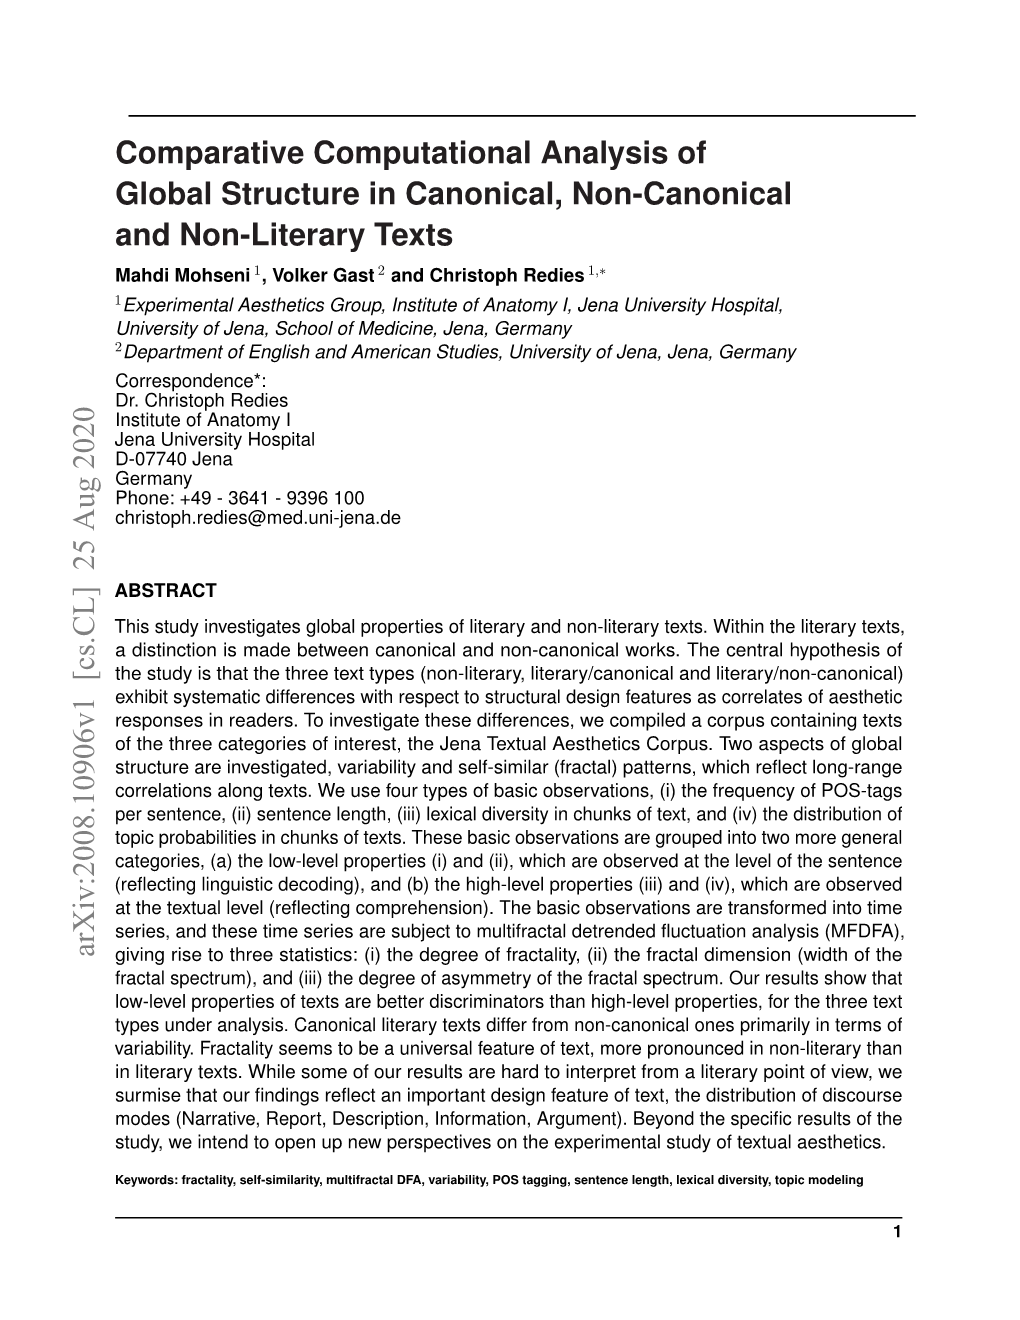 Comparative Computational Analysis of Global Structure in Canonical